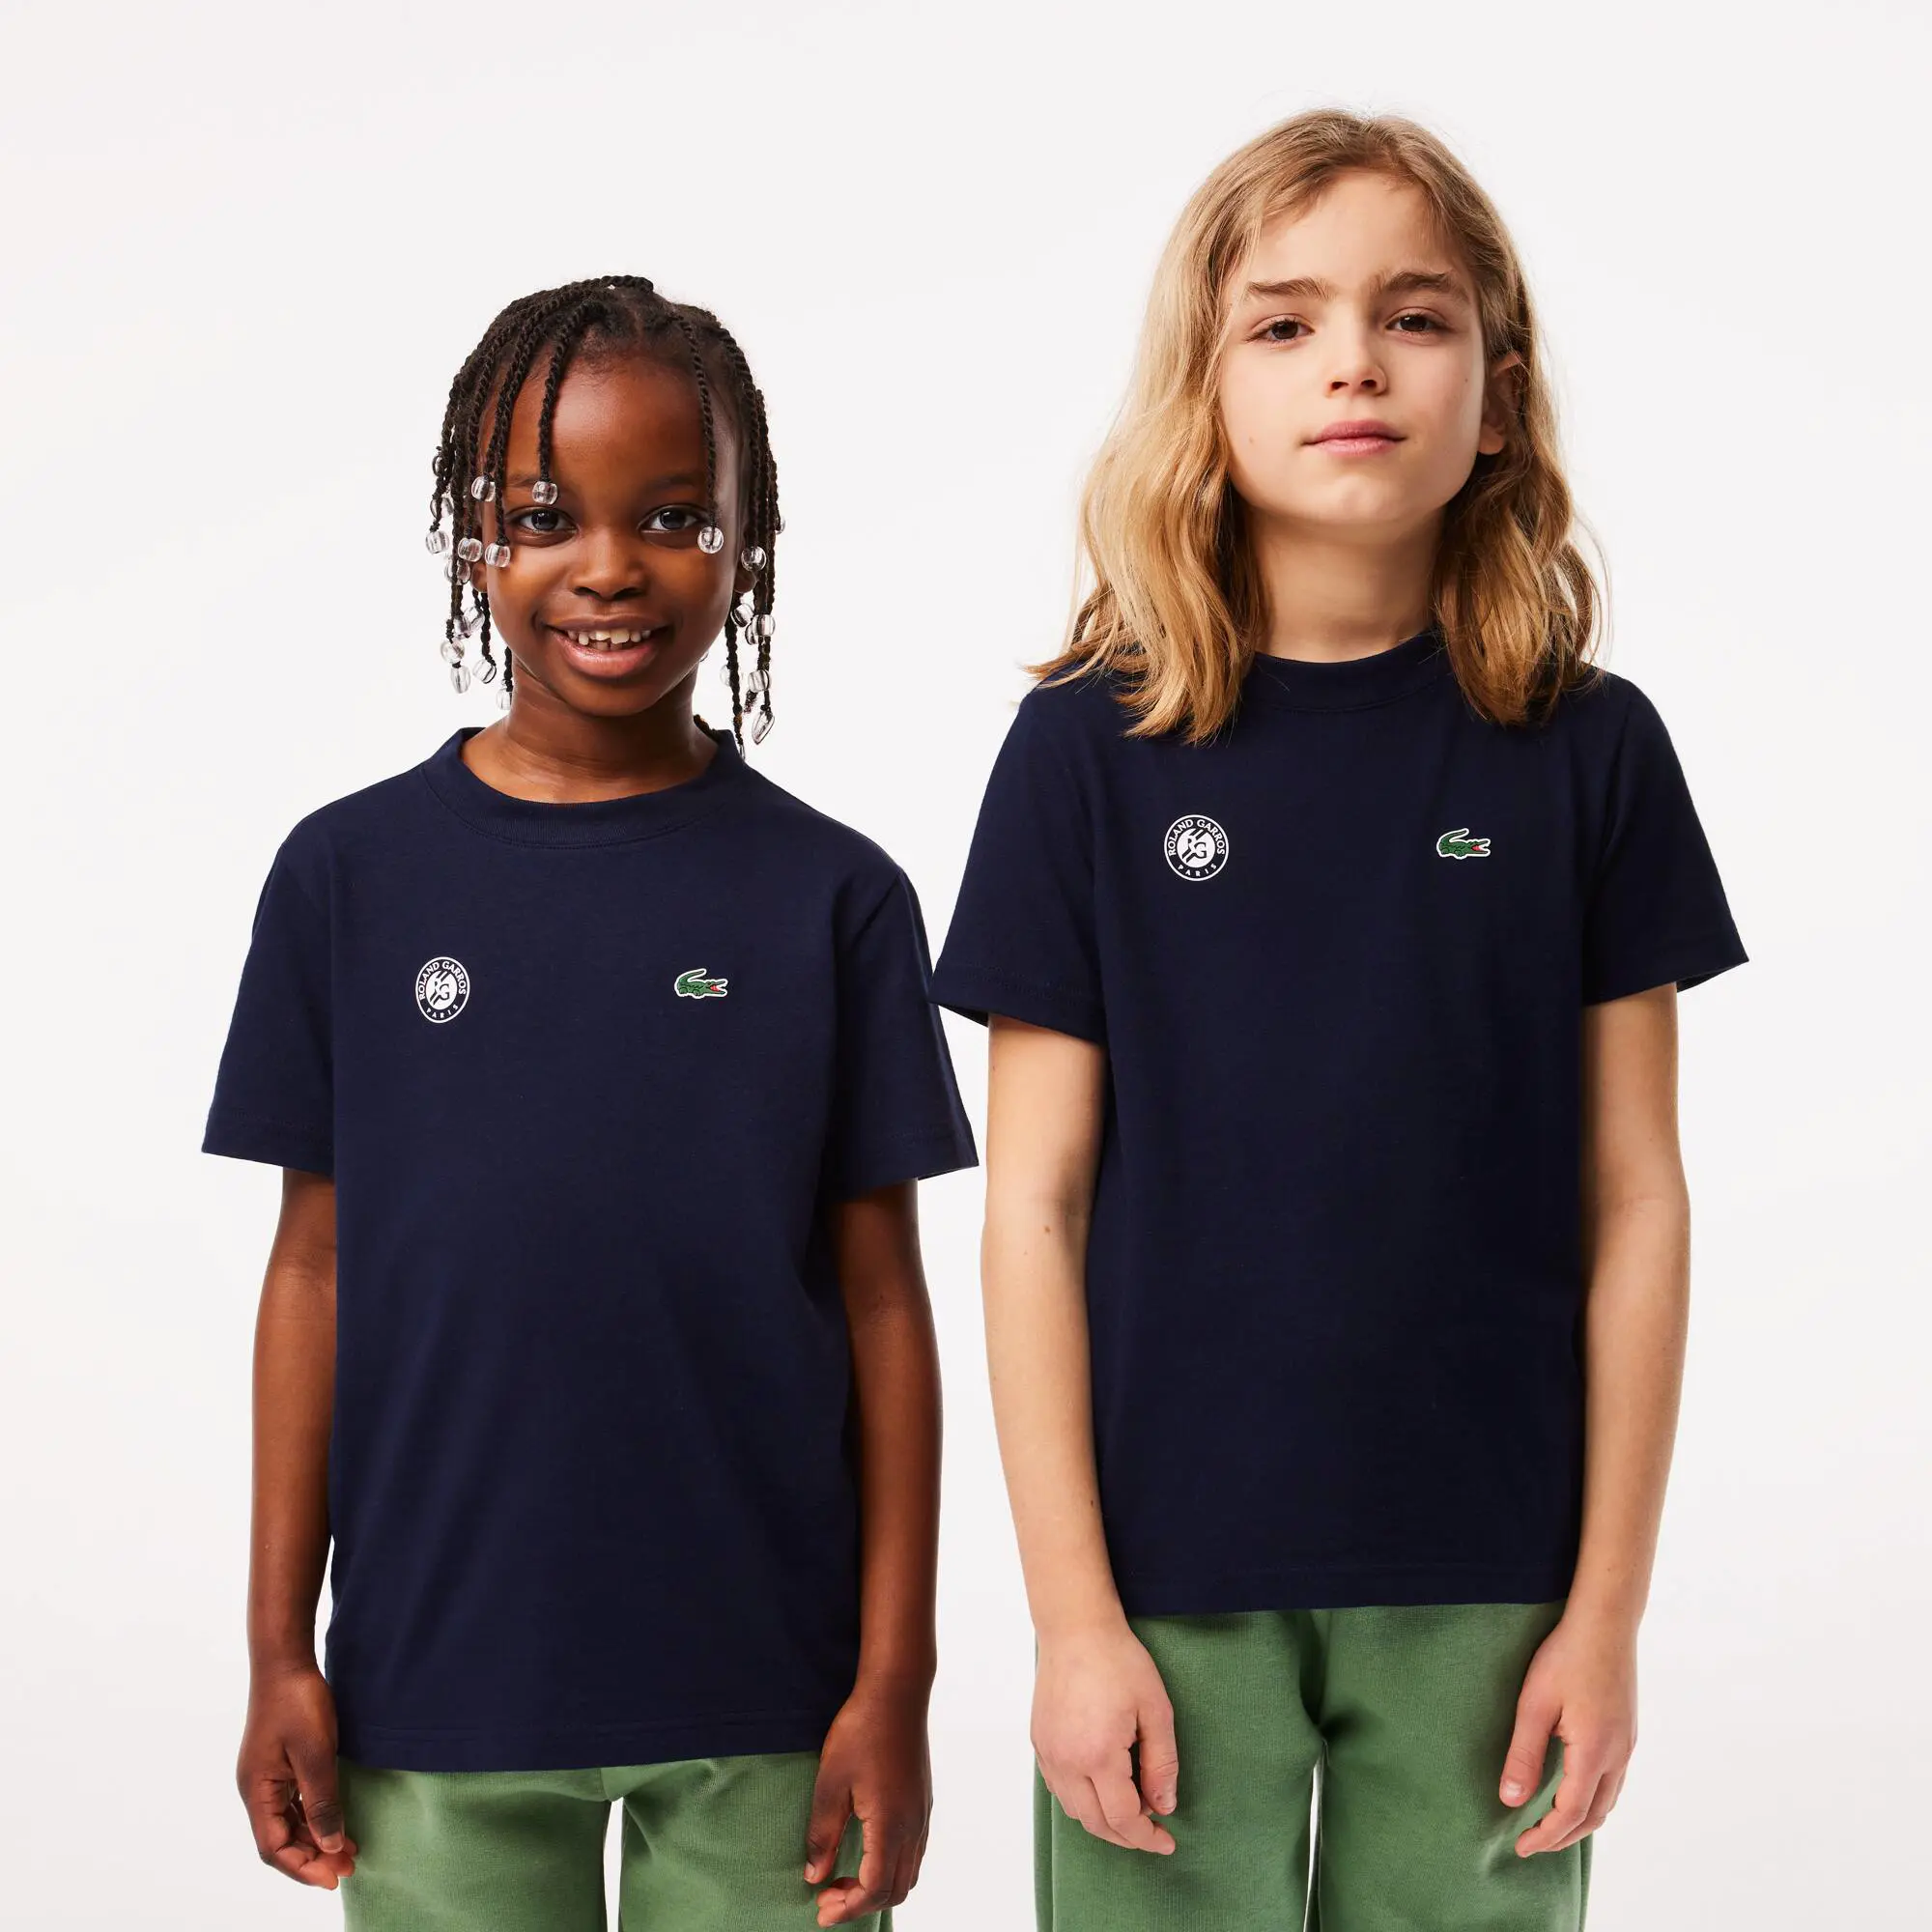 Lacoste Kids' Roland Garros Edition Performance Ultra-Dry Jersey T-shirt. 1